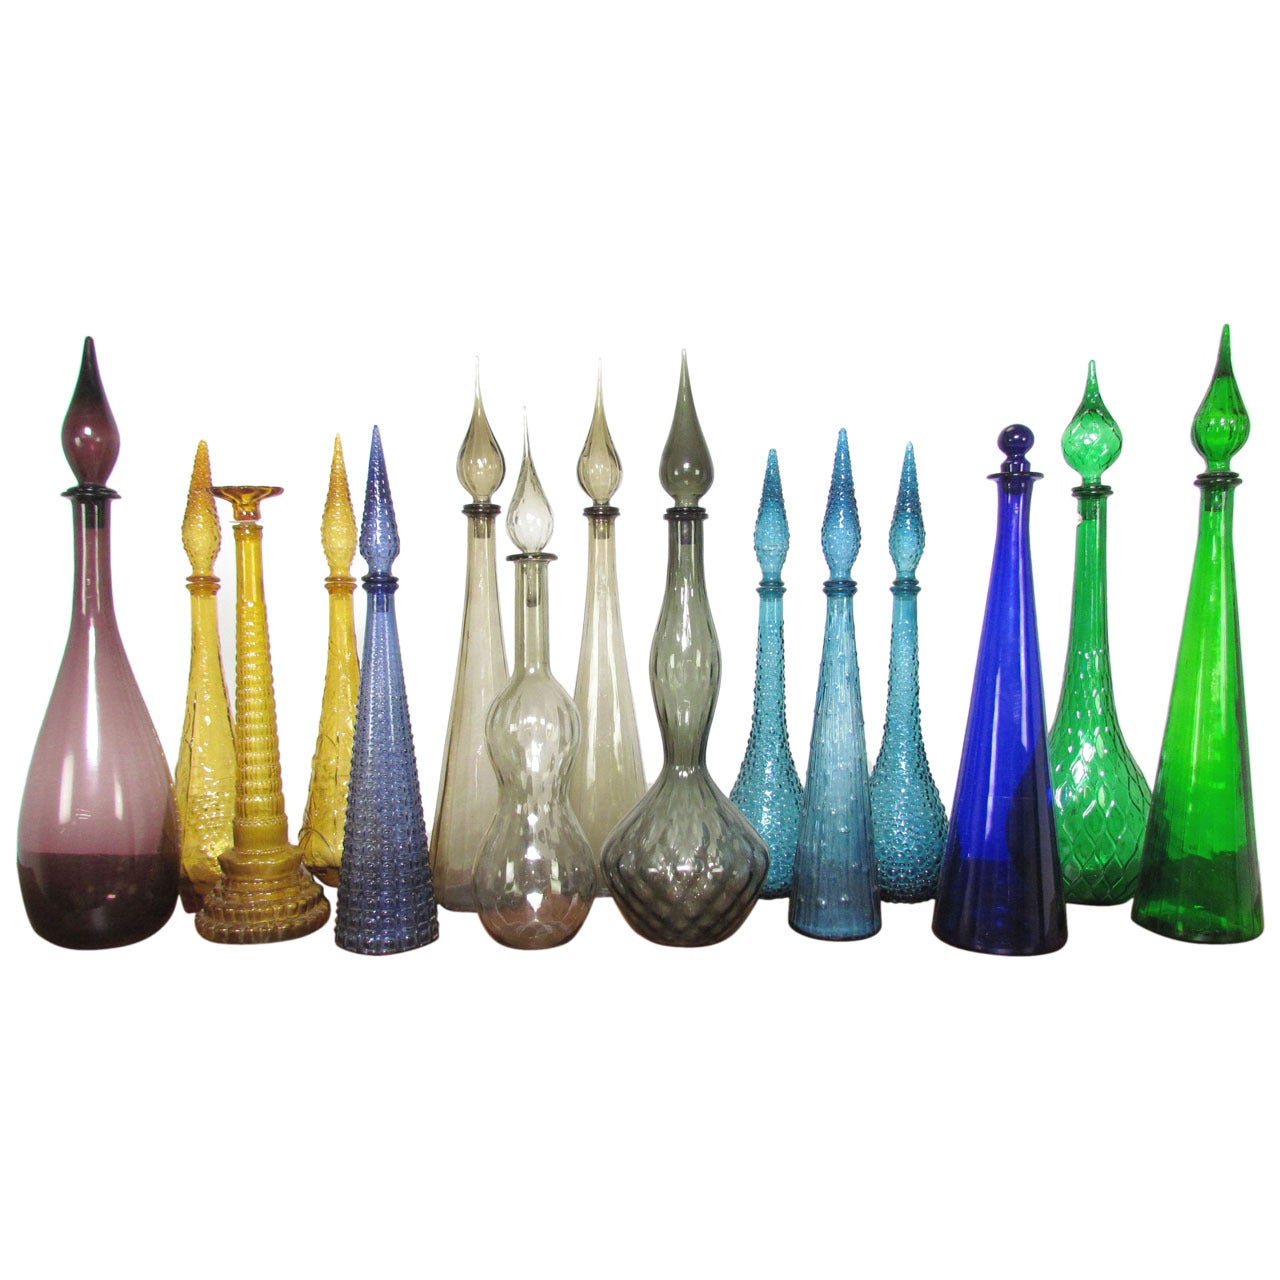 Large Collection of Mid-Century Modern Glass Genie Decanter Bottles